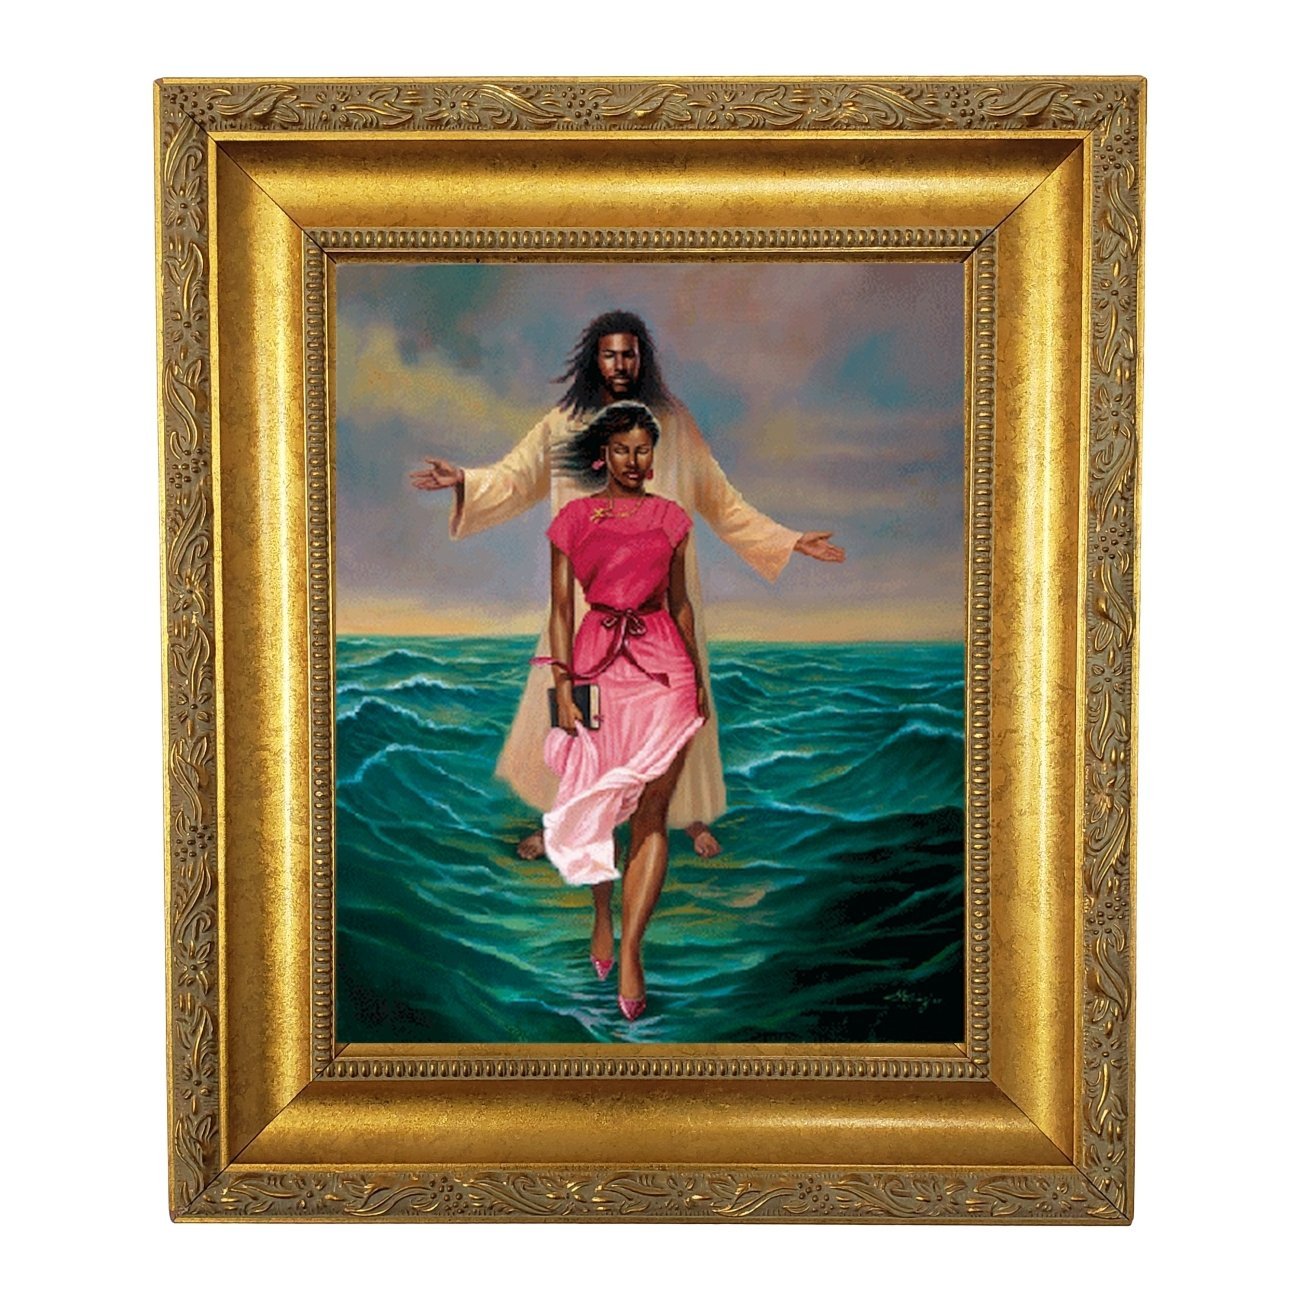 2 of 3: He Walks With Me (African American Jesus) by Sterling Brown (Gold Frame)